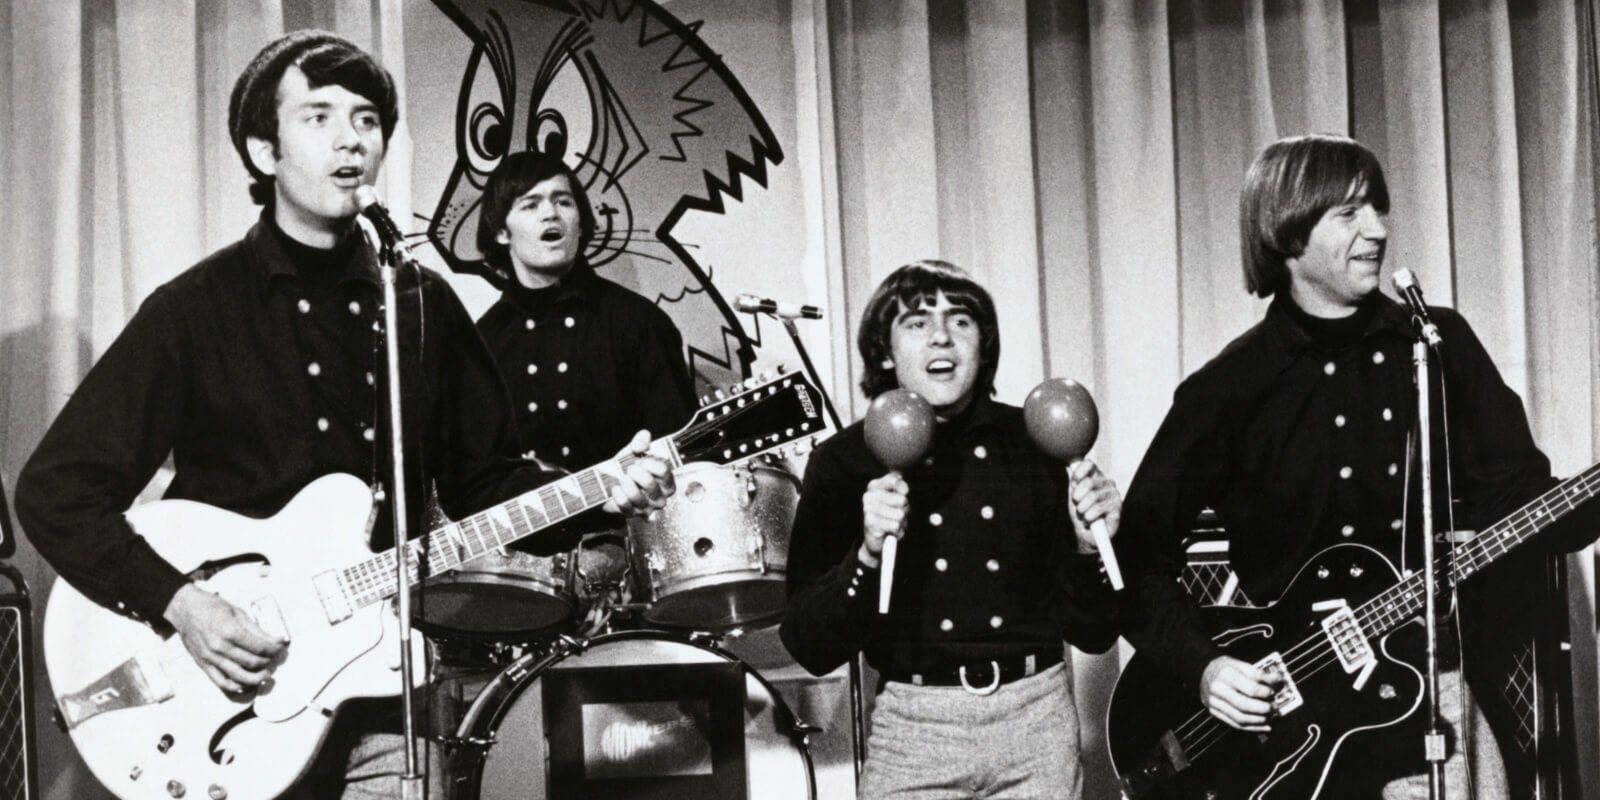 The Monkees members photographed on the set of their television show included Mike Nesmith, Micky Dolenz, Davy Jones, and Peter Tork.